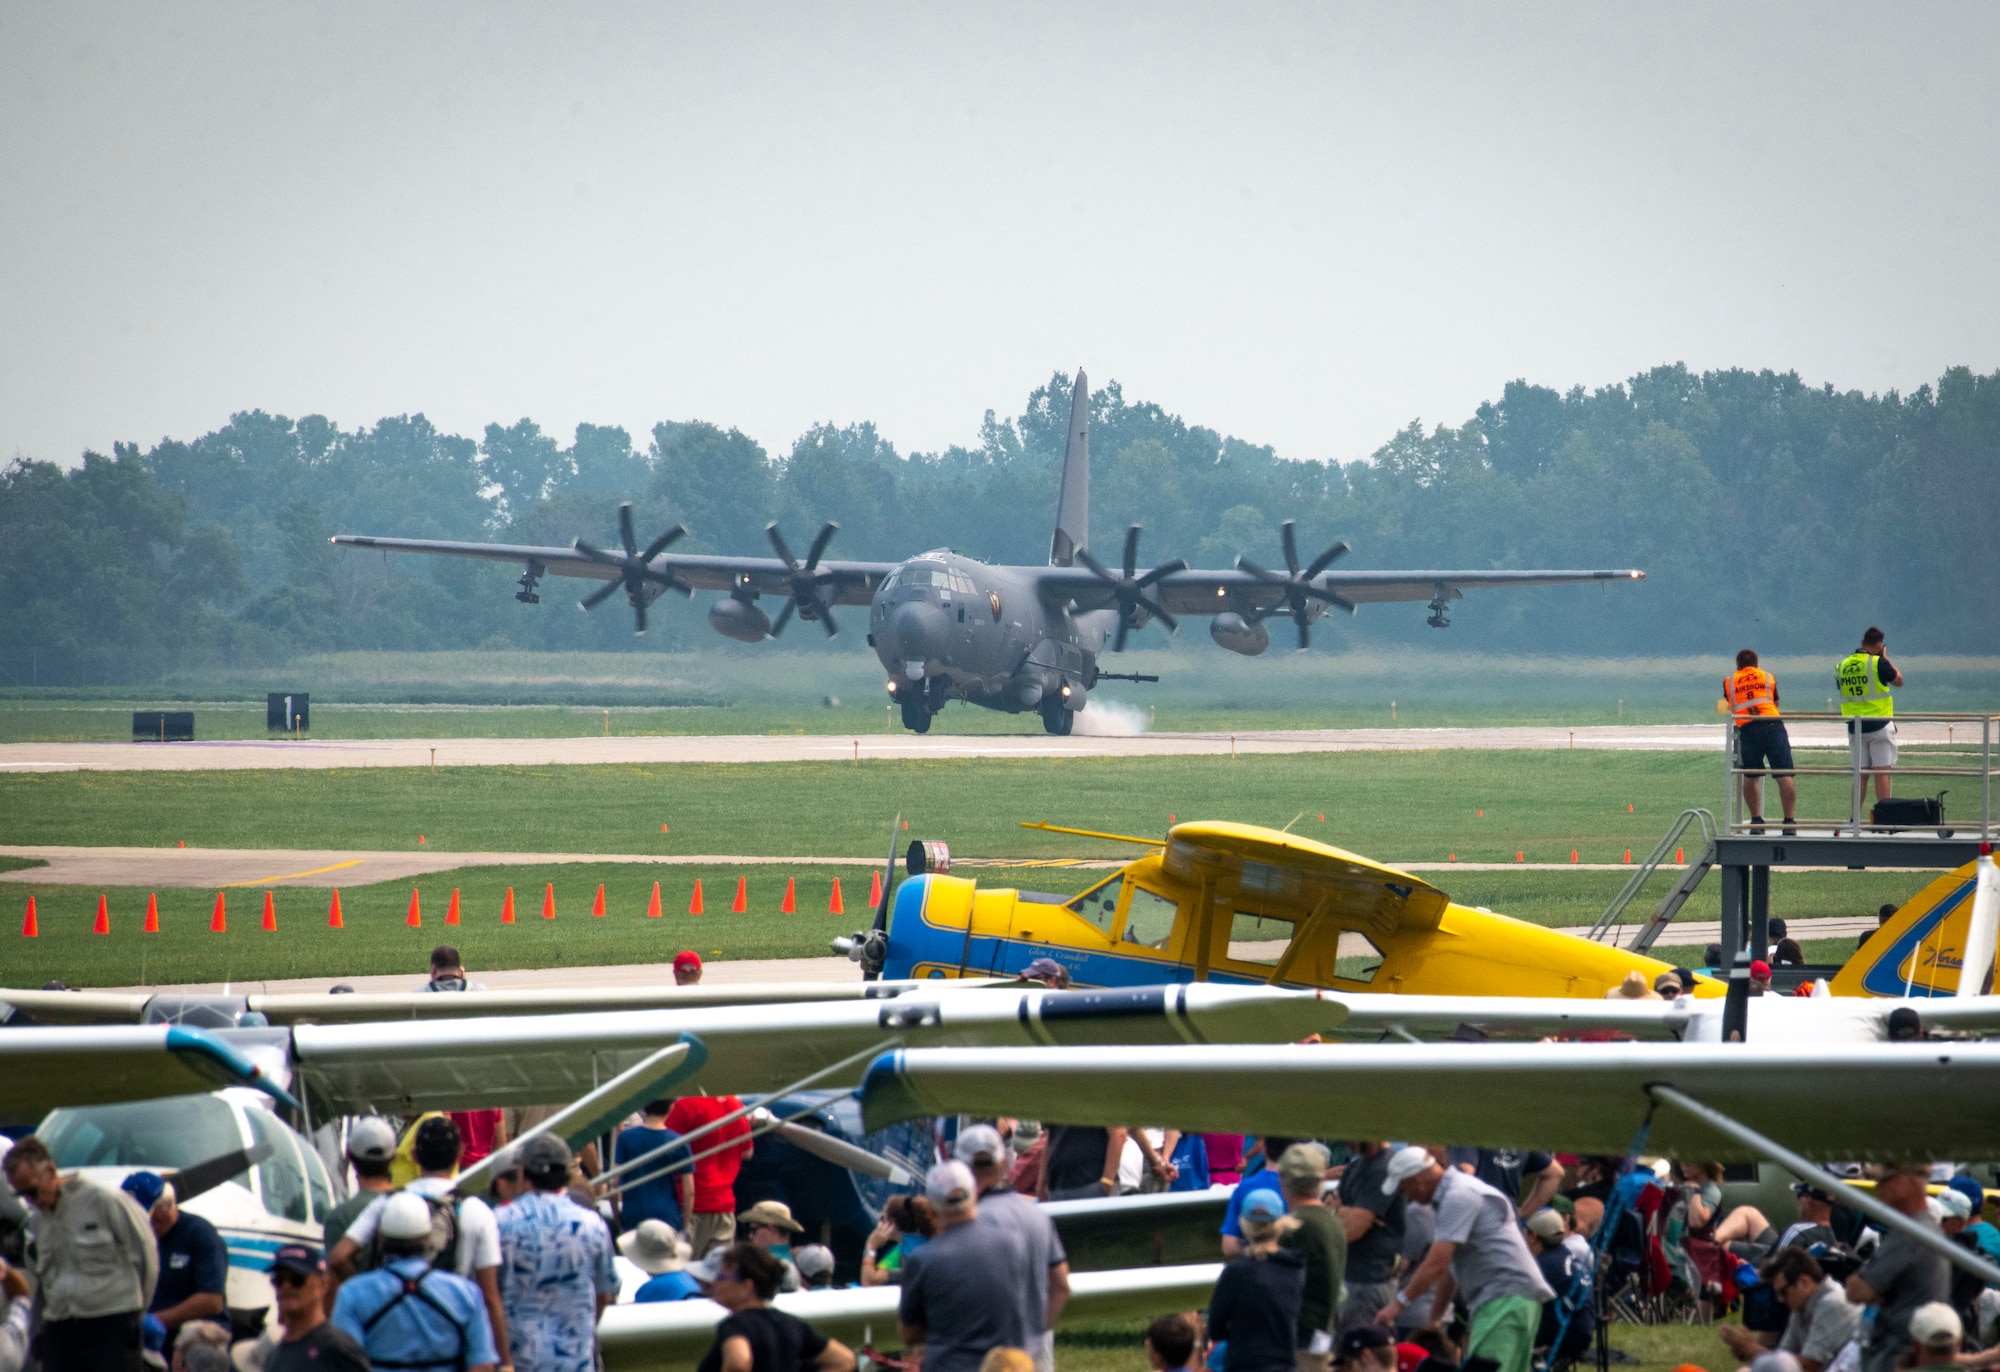 An AC-130J Ghostrider assigned to Air Force Special Operations Command lands after completing a personnel recovery demonstration at Wittman Regional Airport, Wis., July 29, 2021.